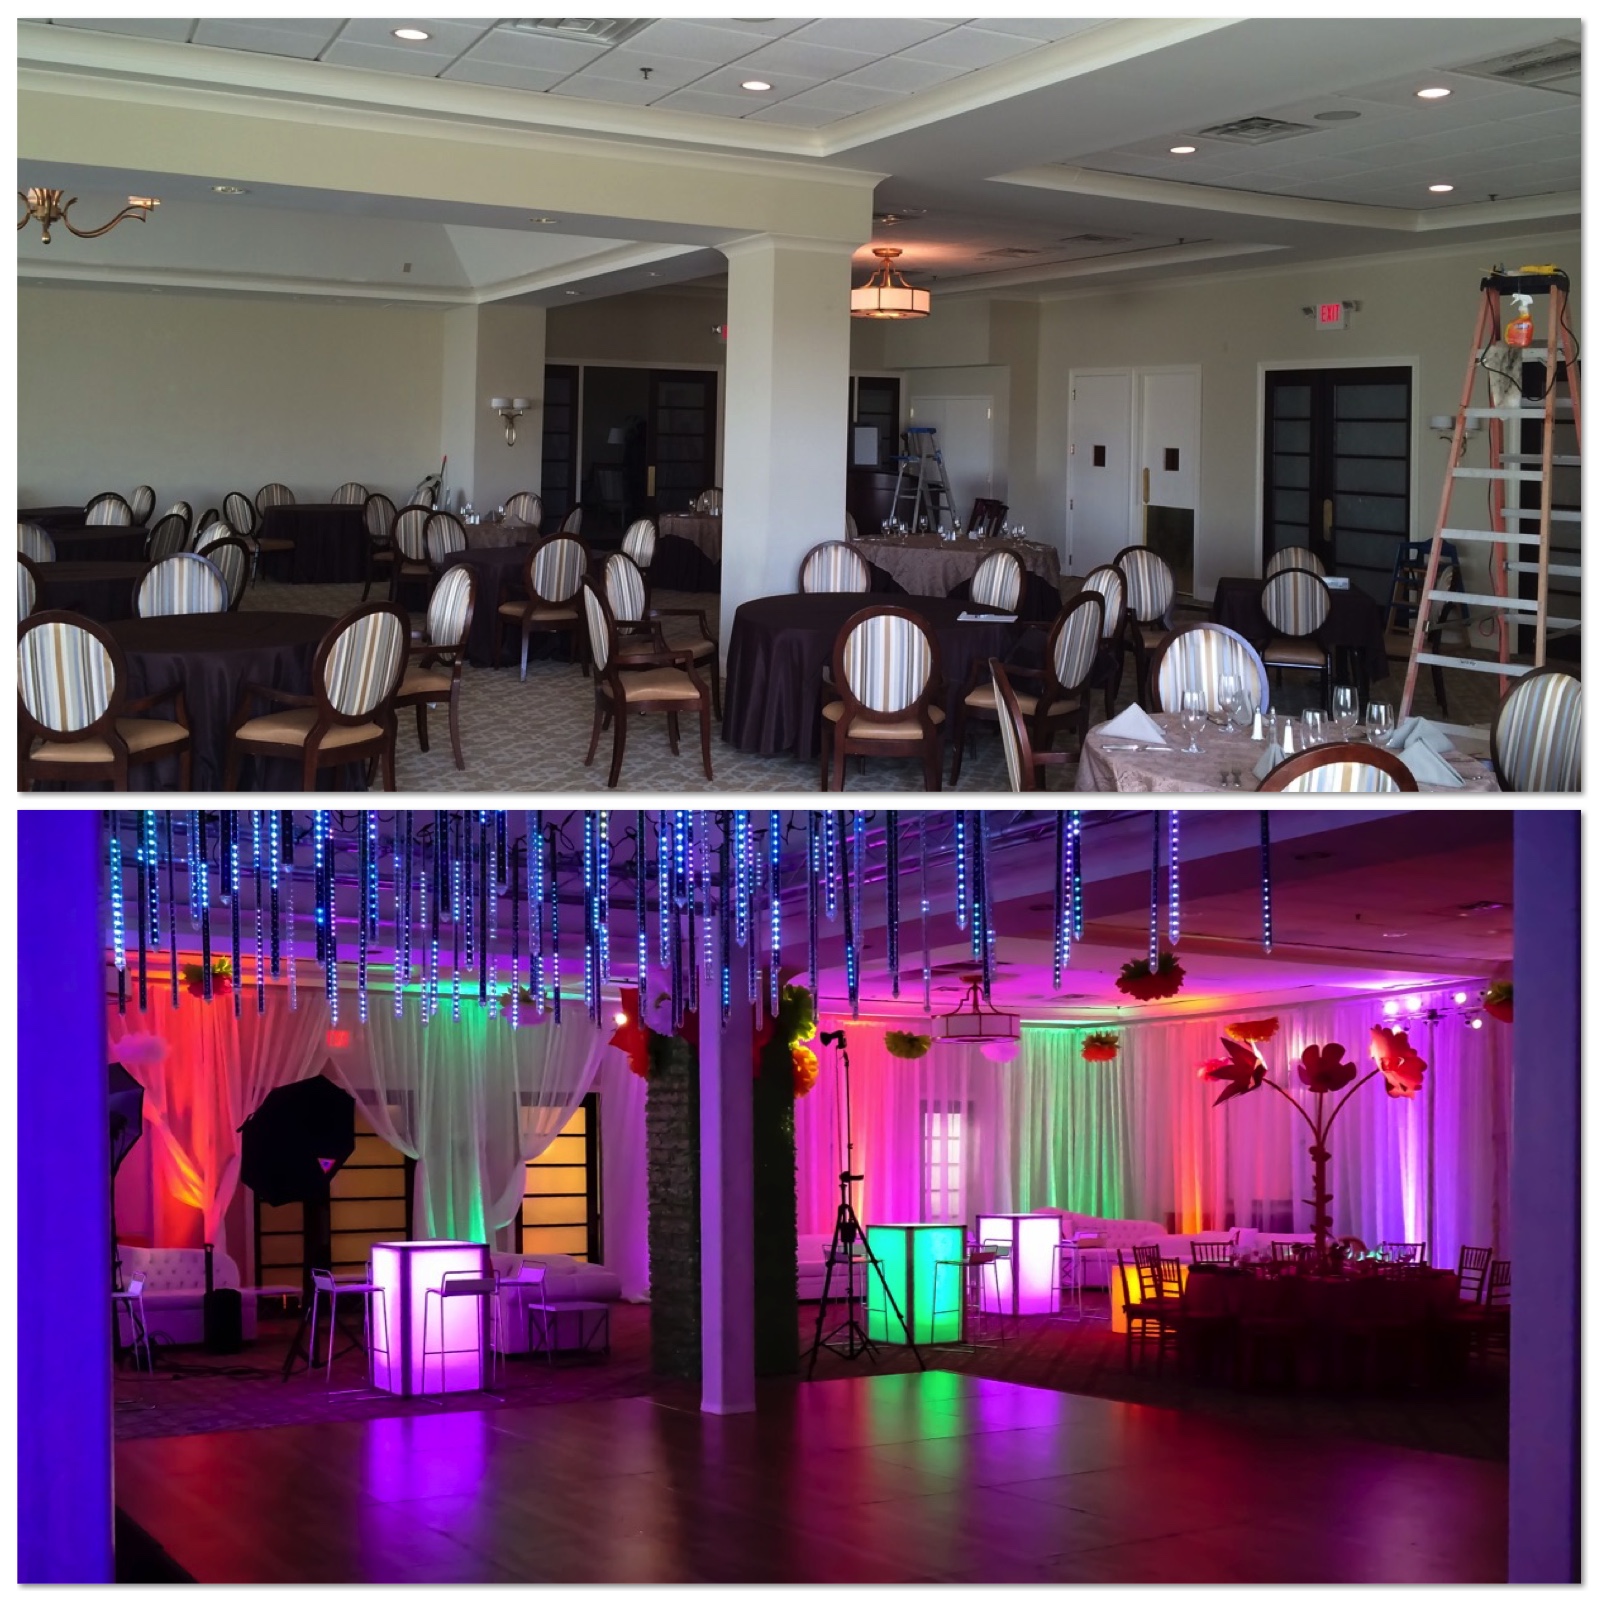 Crestmont Country Club Bat Mitzvah Design Centerpiece Before and After - Eggsotic Events NJ NYC Event Design Lighting Decor Drape Rental NJ NYC .jpg